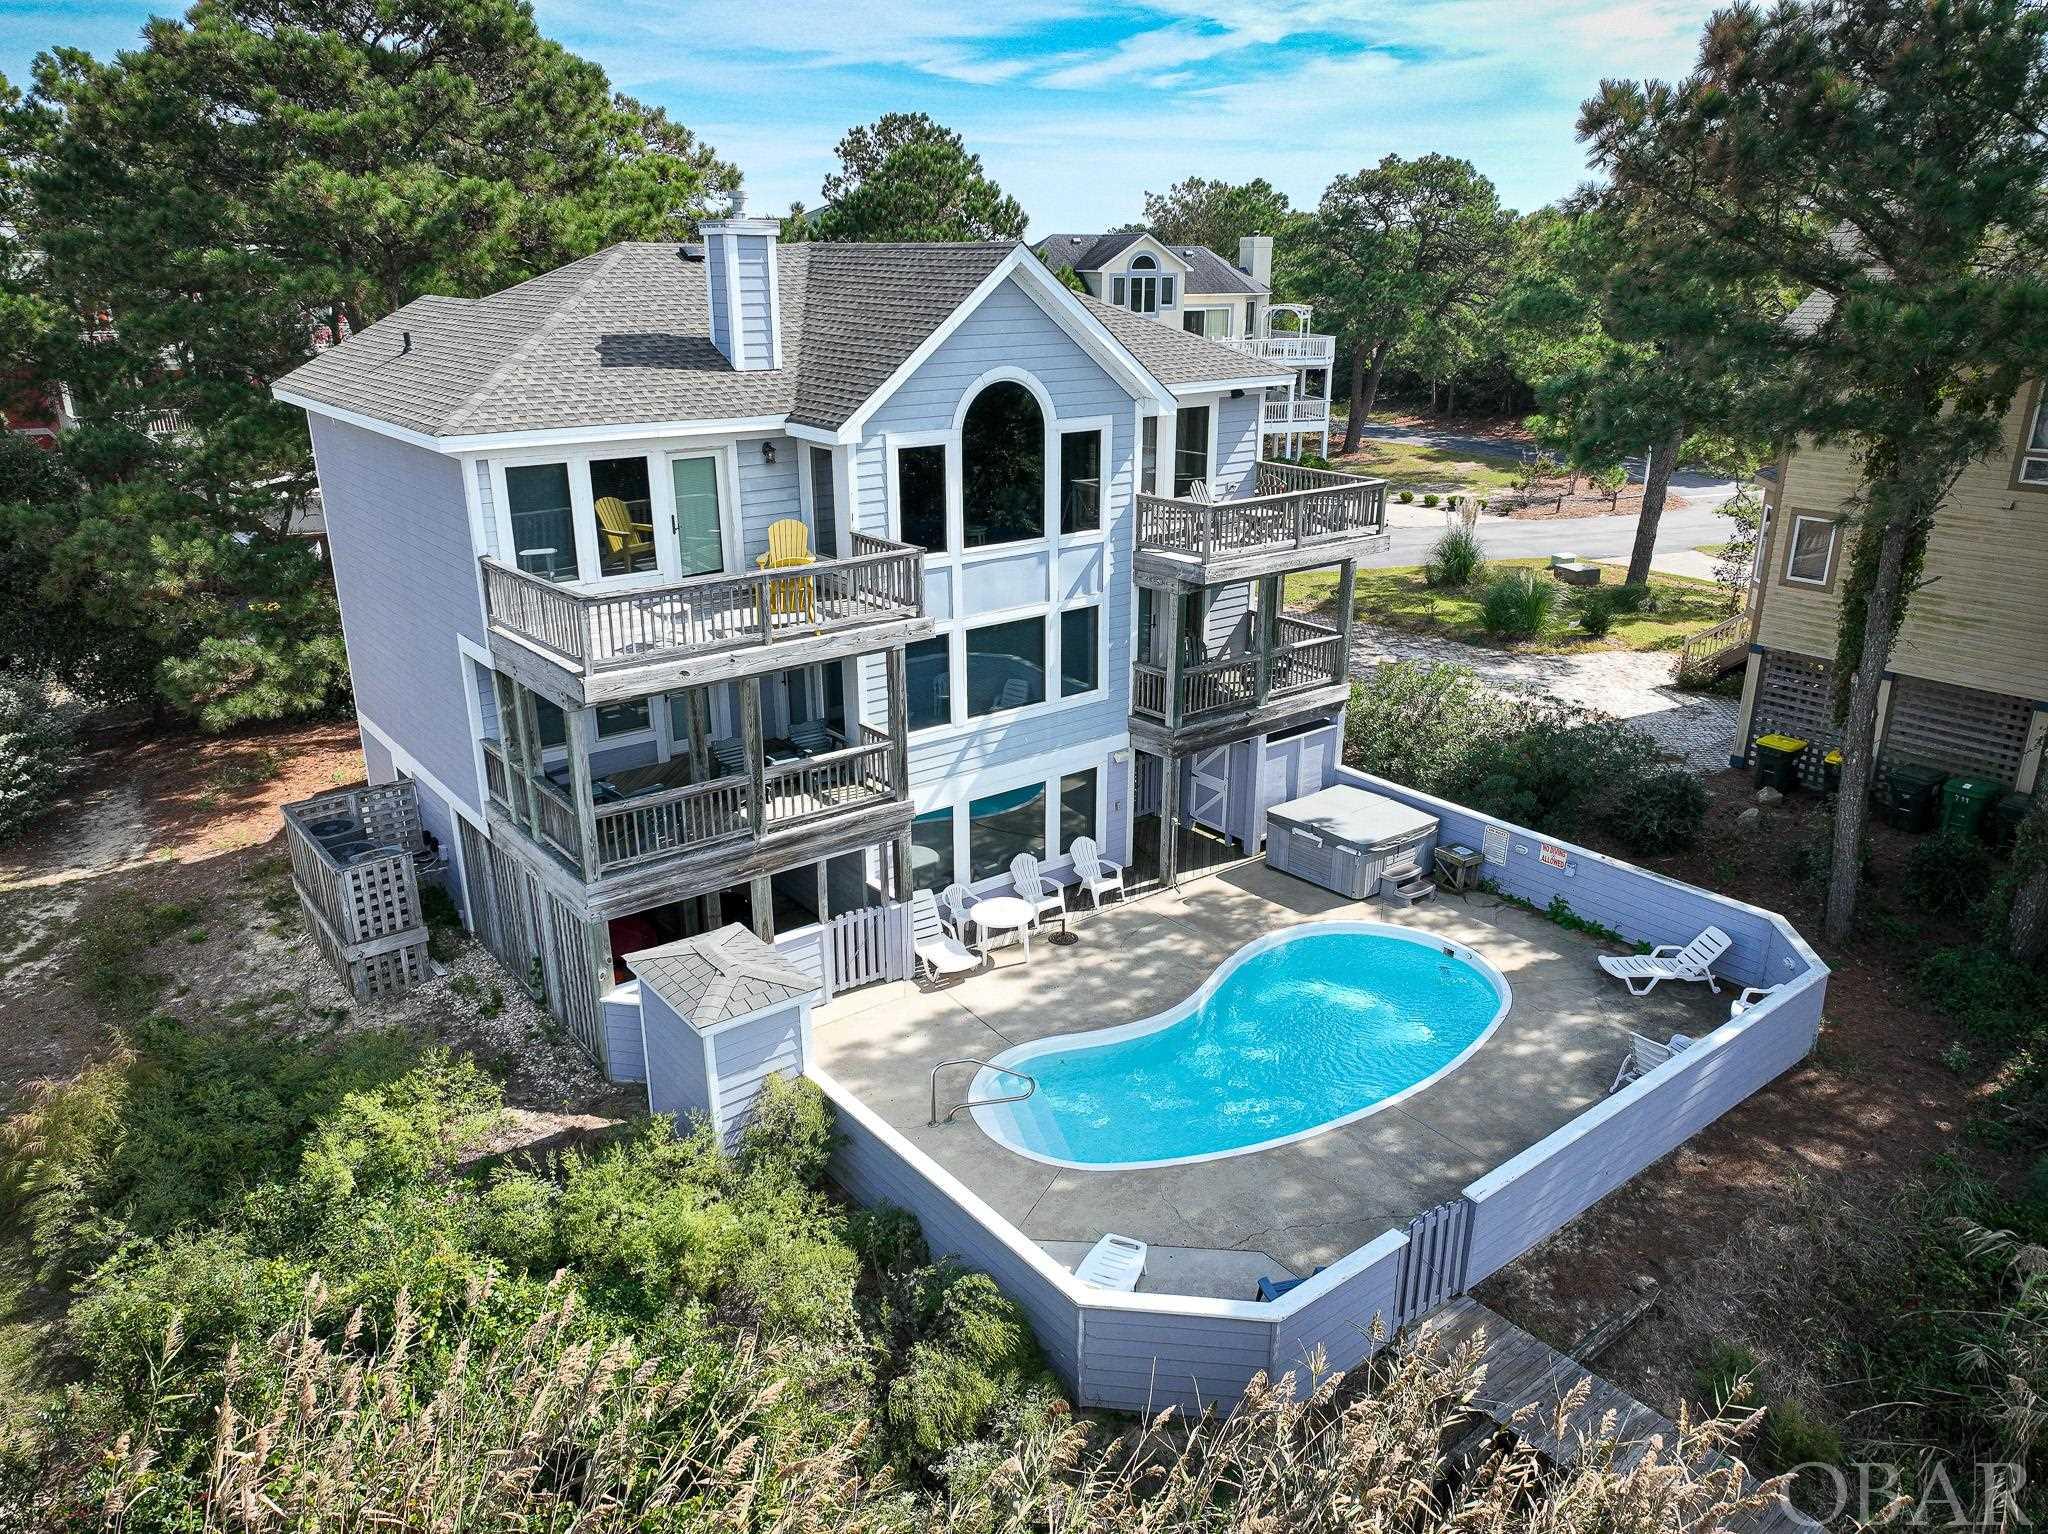 Welcome to 876 Drifting Sands Drive, where the beauty of coastal living meets the tranquility of Soundfront serenity. This luxurious home offers a generous heated living space, boasting five bedrooms, five and one-half baths, a game room, an elevator, a sparkling in-ground pool, and a private boardwalk leading to the breathtaking Currituck Sound.  Here are the remarkable details:  Nestled along the tranquil shores of the Currituck Sound, this home provides a front-row seat to mesmerizing sunsets, gentle breezes, abundant wildlife and the serene beauty of the Outer Banks.  With over 3,000 square feet of living space, this home exudes a sense of space and luxury. The open floor plan allows for easy living and entertaining, while large windows frame the captivating water views. Five Luxurious Bedrooms: Each bedroom is designed with comfort and relaxation in mind. Wake up to the soothing sound of lapping waves and enjoy private en-suite bathrooms.  Endless Entertaining Possibilities: The game room is the perfect space for indoor entertainment, featuring a fosse ball table and ample room for family and friends to gather. Whether you're hosting a game night or a movie night, this area offers endless possibilities.  An elevator makes it easy to access all levels of this stately home, ensuring accessibility and convenience for all family members and guests.  Step into the backyard and discover your own private paradise. The in-ground pool is perfect for cooling off on those warm summer days, and the surrounding deck is ideal for lounging in the sun.  Meander down your private boardwalk leading to the sound. This is your gateway to activities like kayaking, paddle boarding, fishing, or simply relaxing by the water's edge.  Corolla is known for its peaceful, upscale community and pristine beaches. You'll be close to local shops, restaurants, and the famous Corolla Wild Horse Tours.  Don't miss the breathtaking sunsets that grace the Currituck Sound every evening. Whether you're sipping a glass of wine on the deck or enjoying dinner with family, each sunset will be a memory to cherish. Experience the epitome of coastal living at 876 Drifting Sands Drive. This Soundfront oasis offers the perfect blend of luxury, comfort, and natural beauty.    This home is not only a stunning retreat but also a fantastic investment opportunity. Soundfront properties are highly sought after for vacation rentals, making this an excellent income-producing property.  Contact us today to schedule a viewing and make this dream home yours!